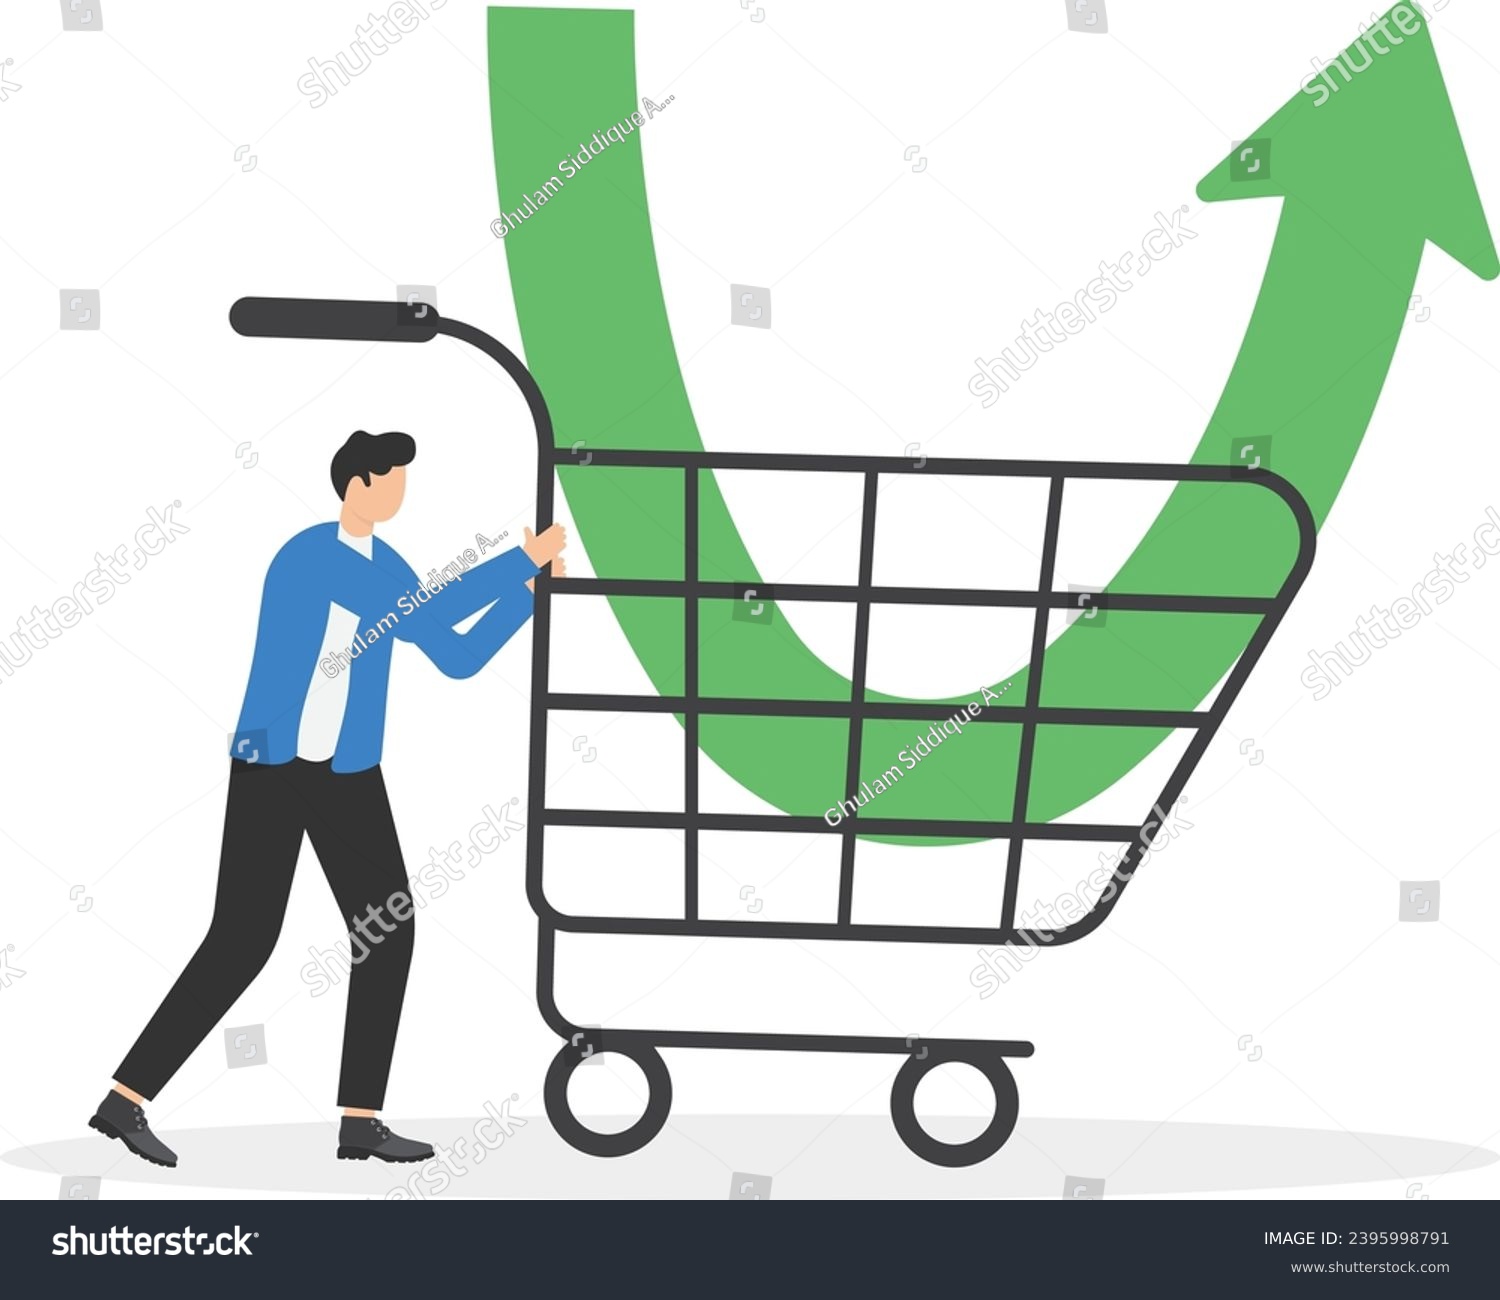 SVG of Businessman investors buy stock with a down arrow graph in a shopping cart. Purchase stock when price drops. Make profit from market collapse. Modern vector illustration in flat style.

 svg